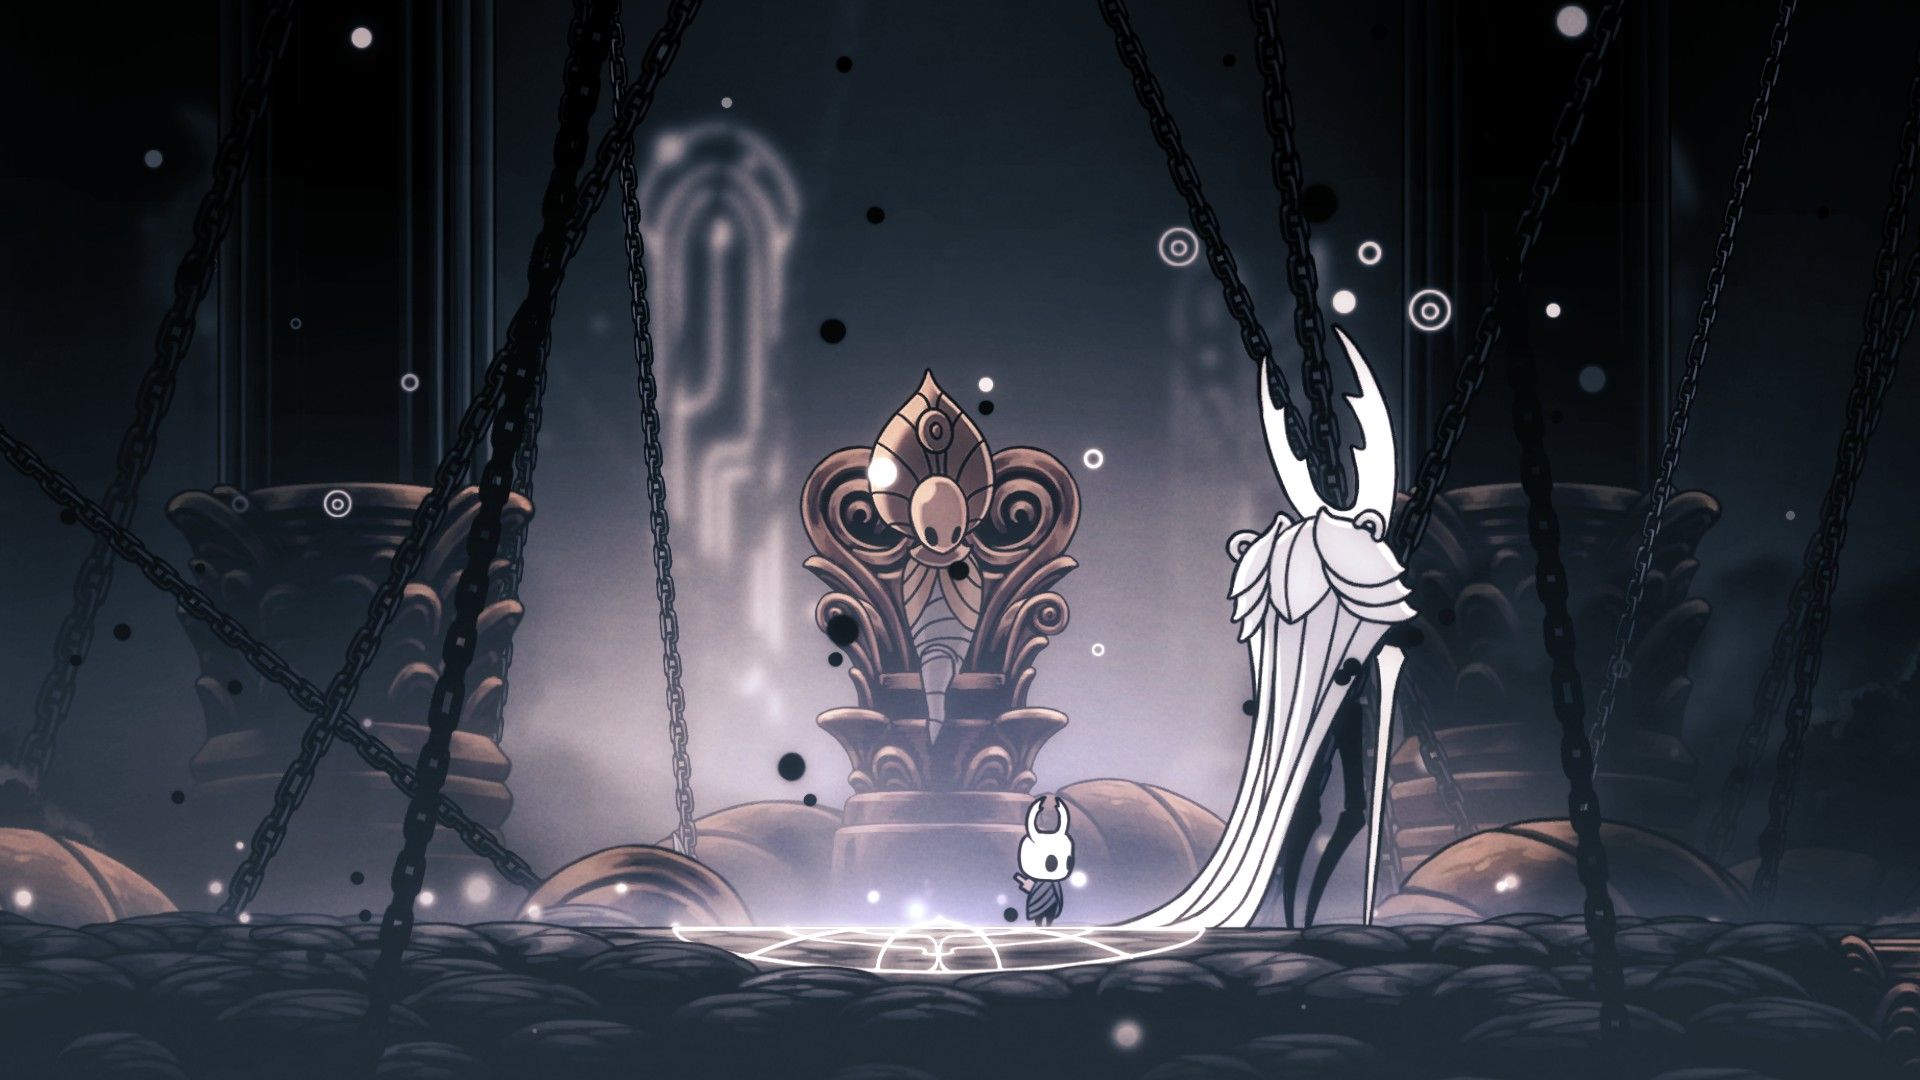 How to beat pure vessel hollow knight